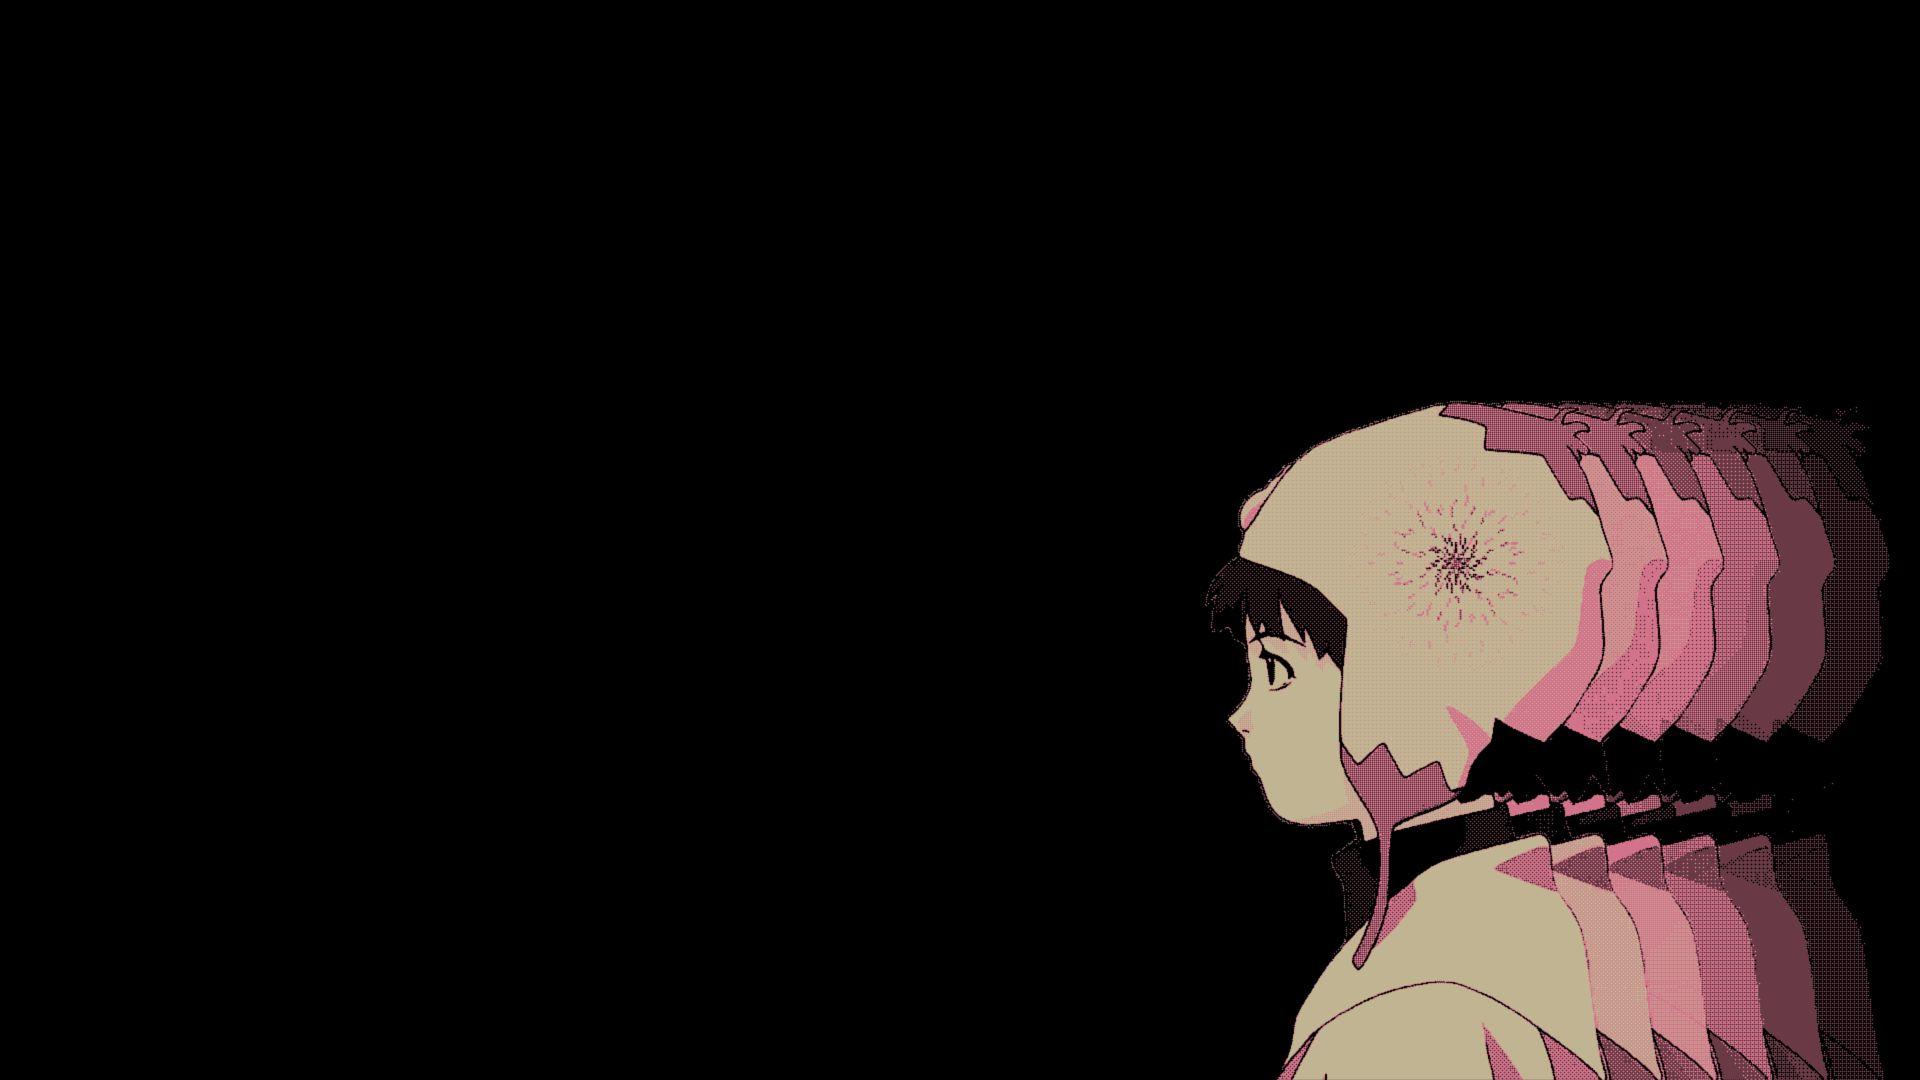 Serial Experiments Lain Wallpaper, Image Collection of Serial